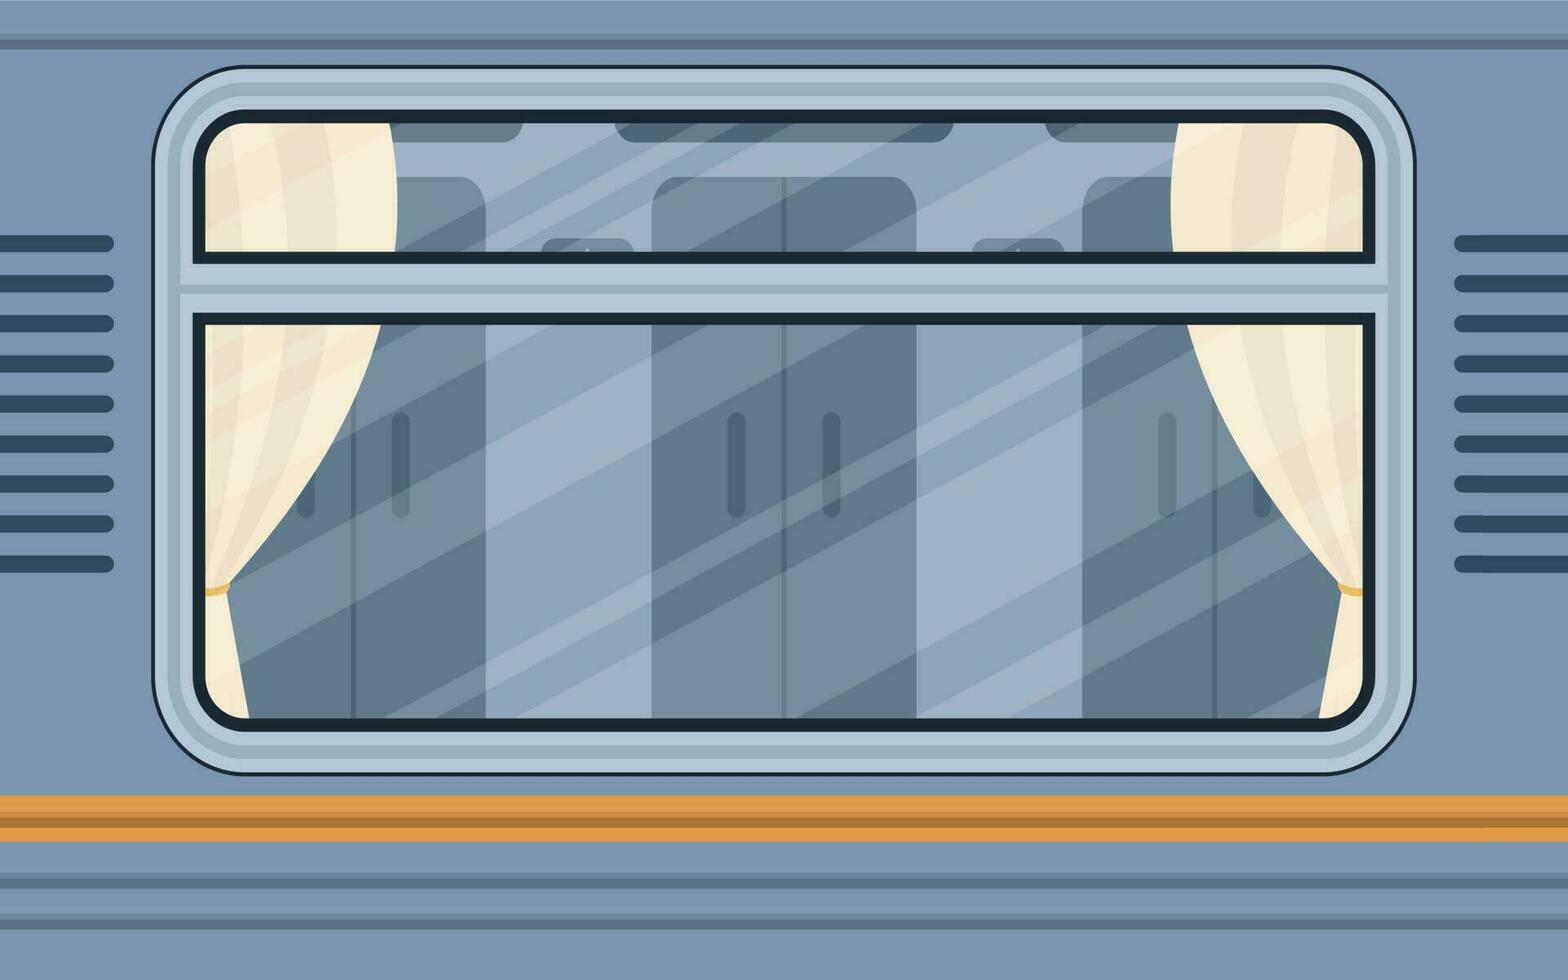 Train compartment windows. Rail transport is shown outside. Cartoon style. Flat style. vector